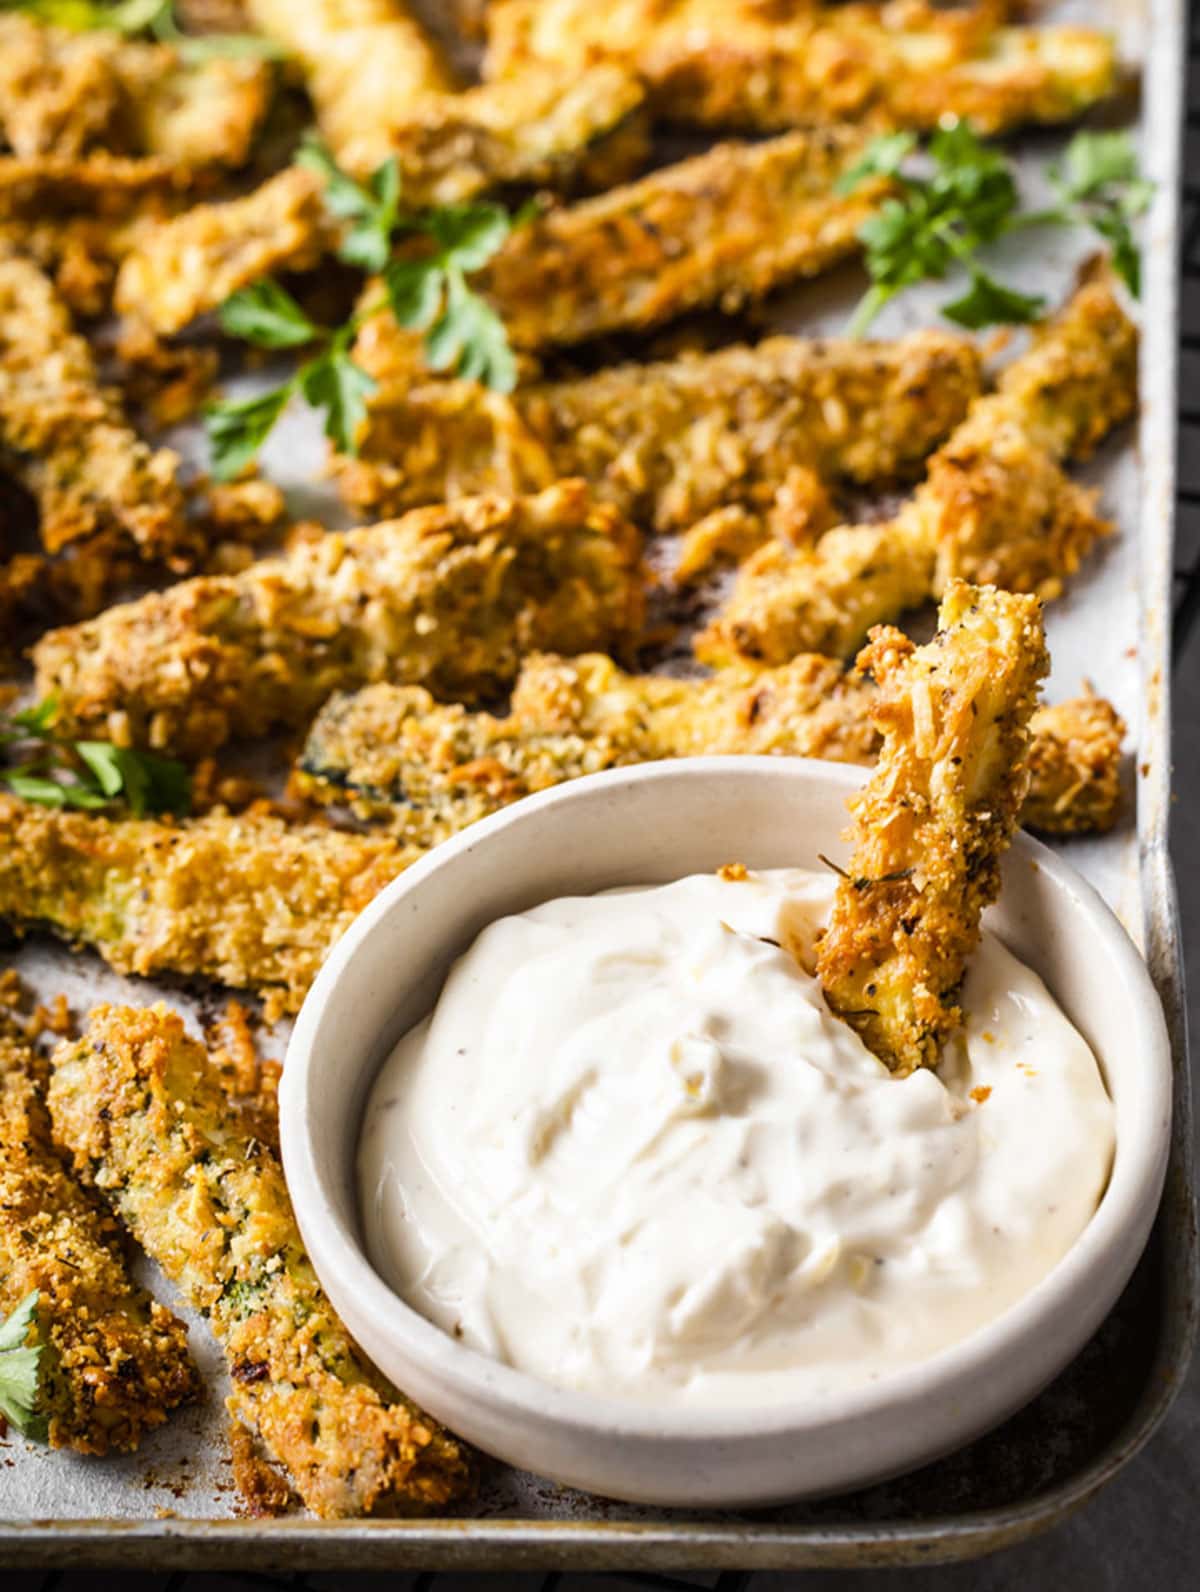 Zucchini fries on a baking sheet and a zucchini in a bowl with lemon aioli.